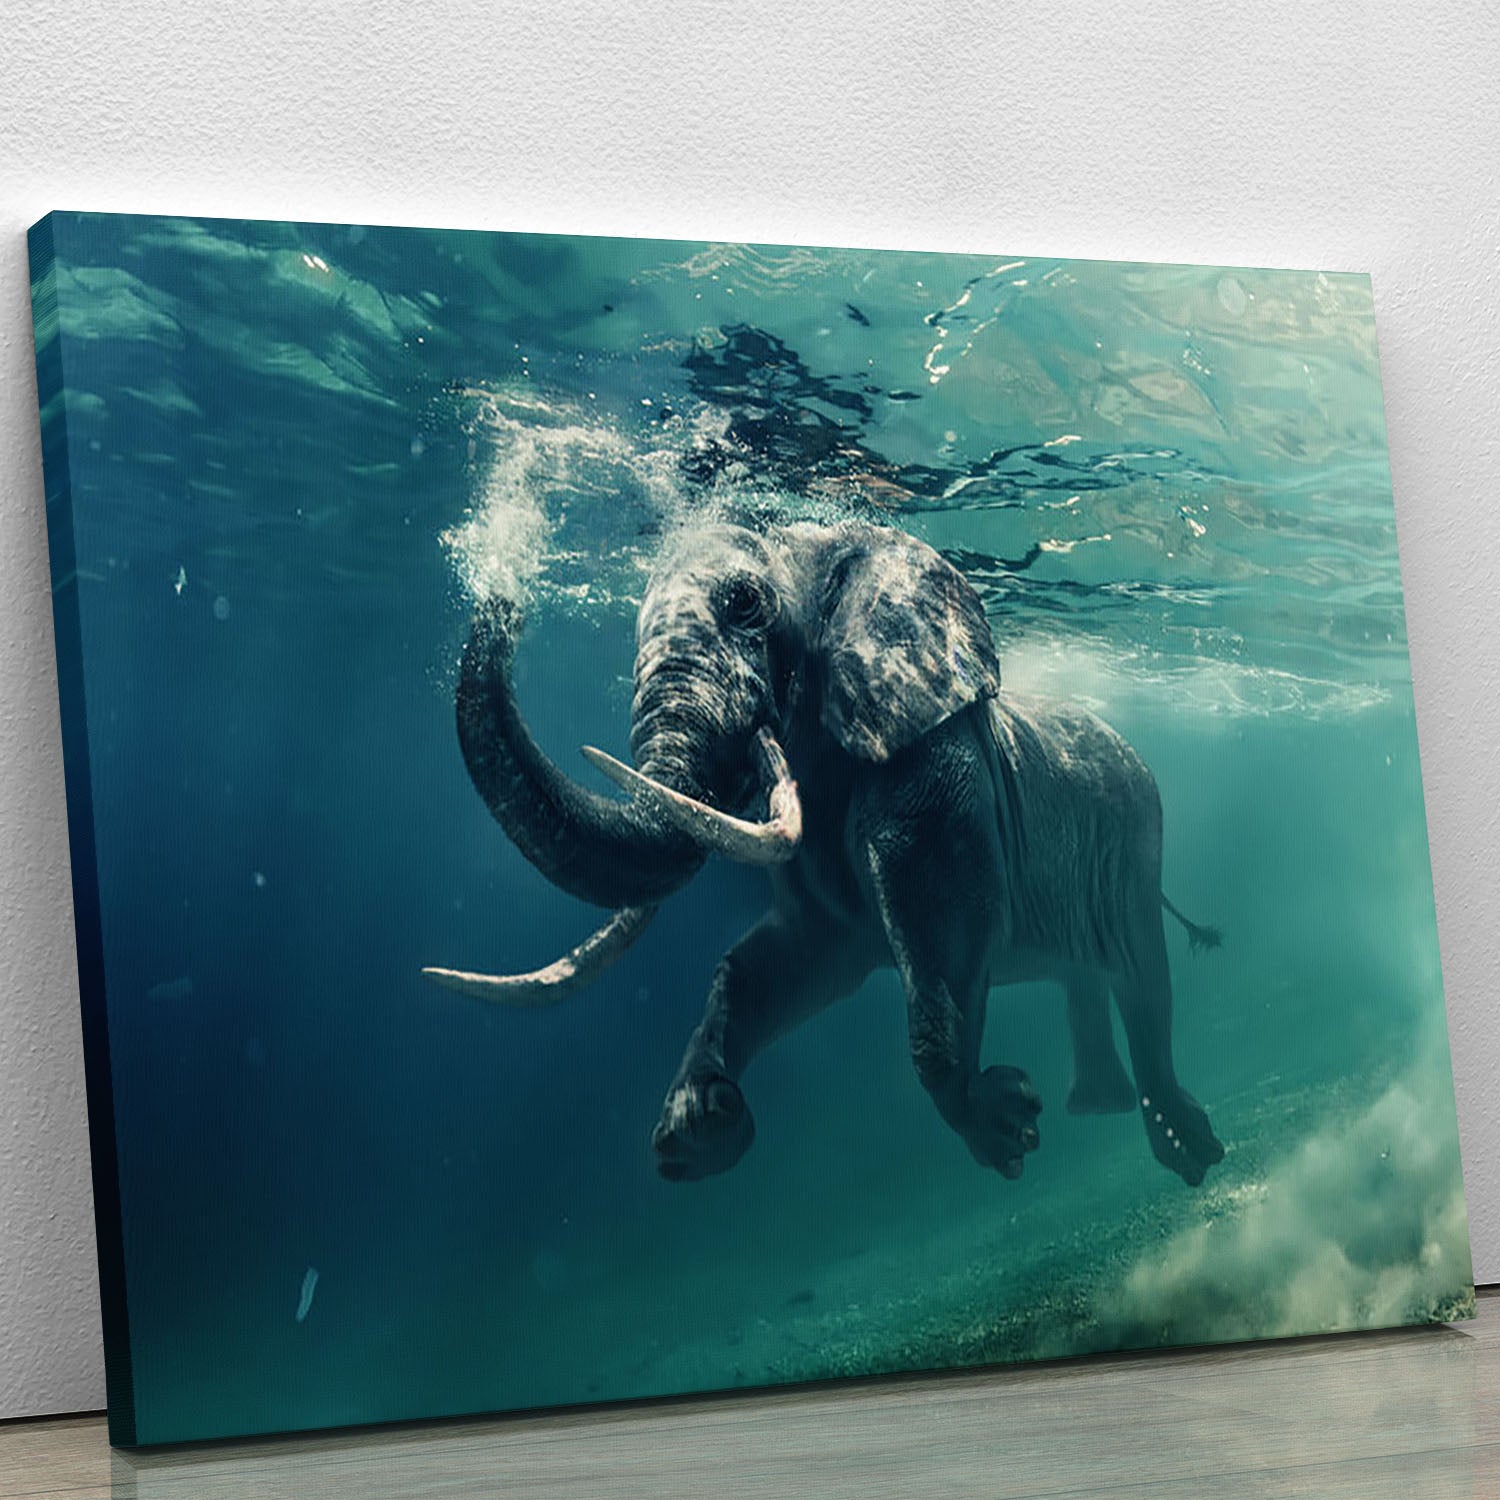 Swimming Elephant Underwater Canvas Print or Poster - Canvas Art Rocks - 1